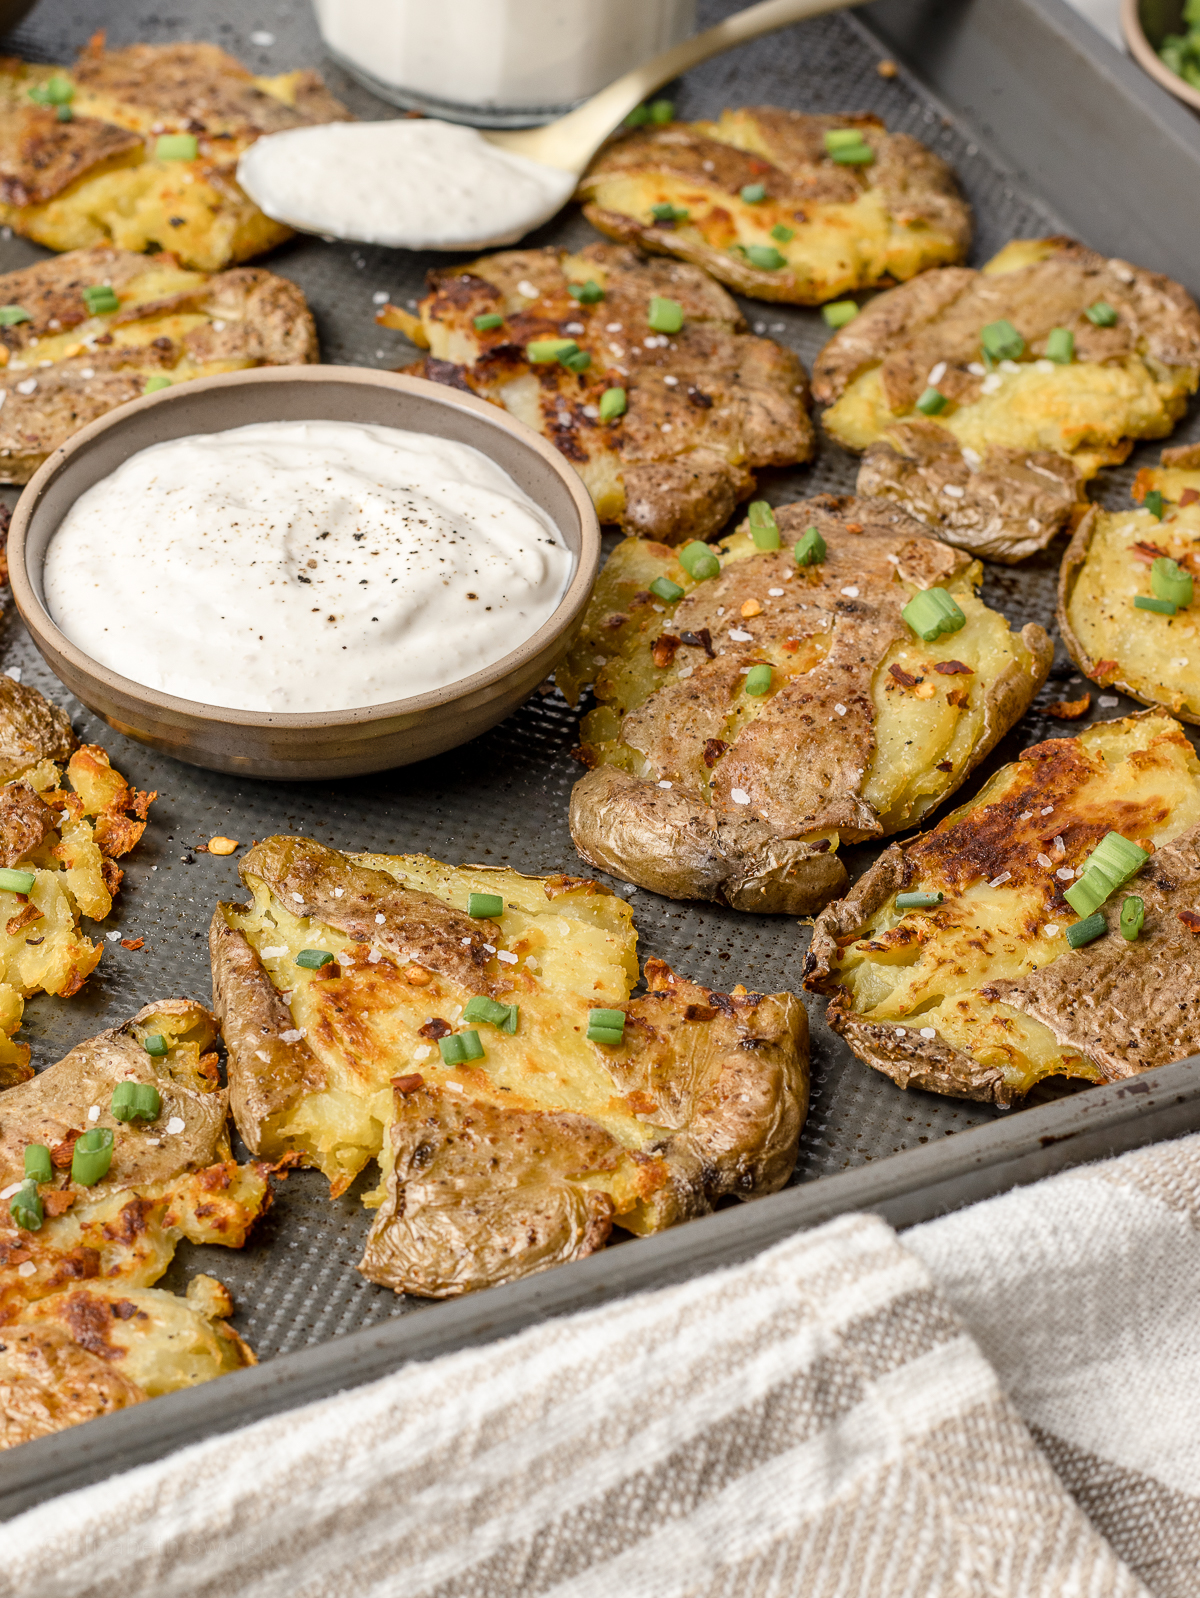 Smashed potatoes and a sheet pan ready to serve with dinner and eat.